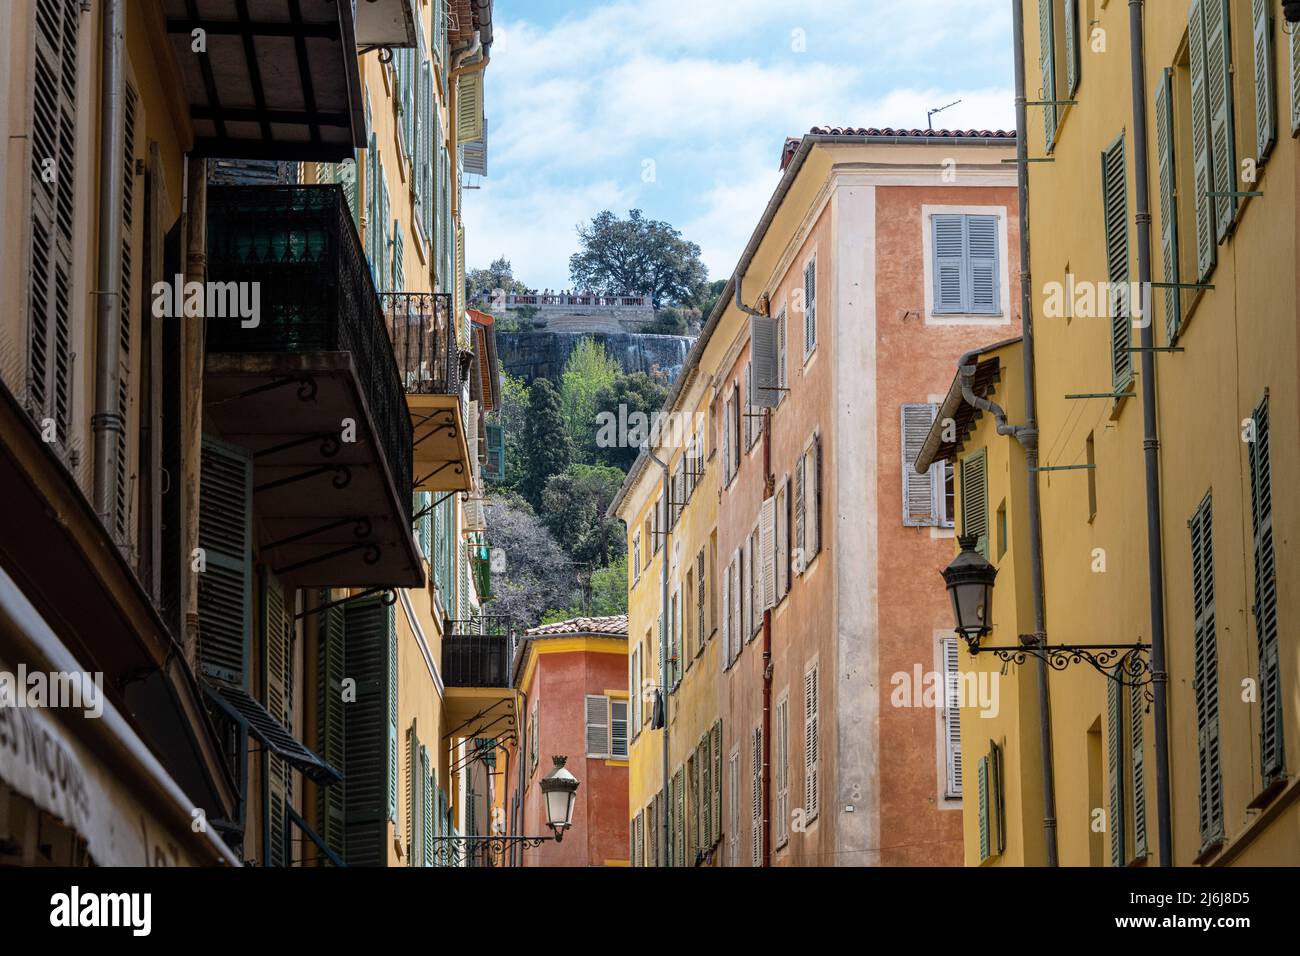 A narrow street in Nice Old Town, looking towards Castle Hill and the Waterfall above the town. Stock Photo